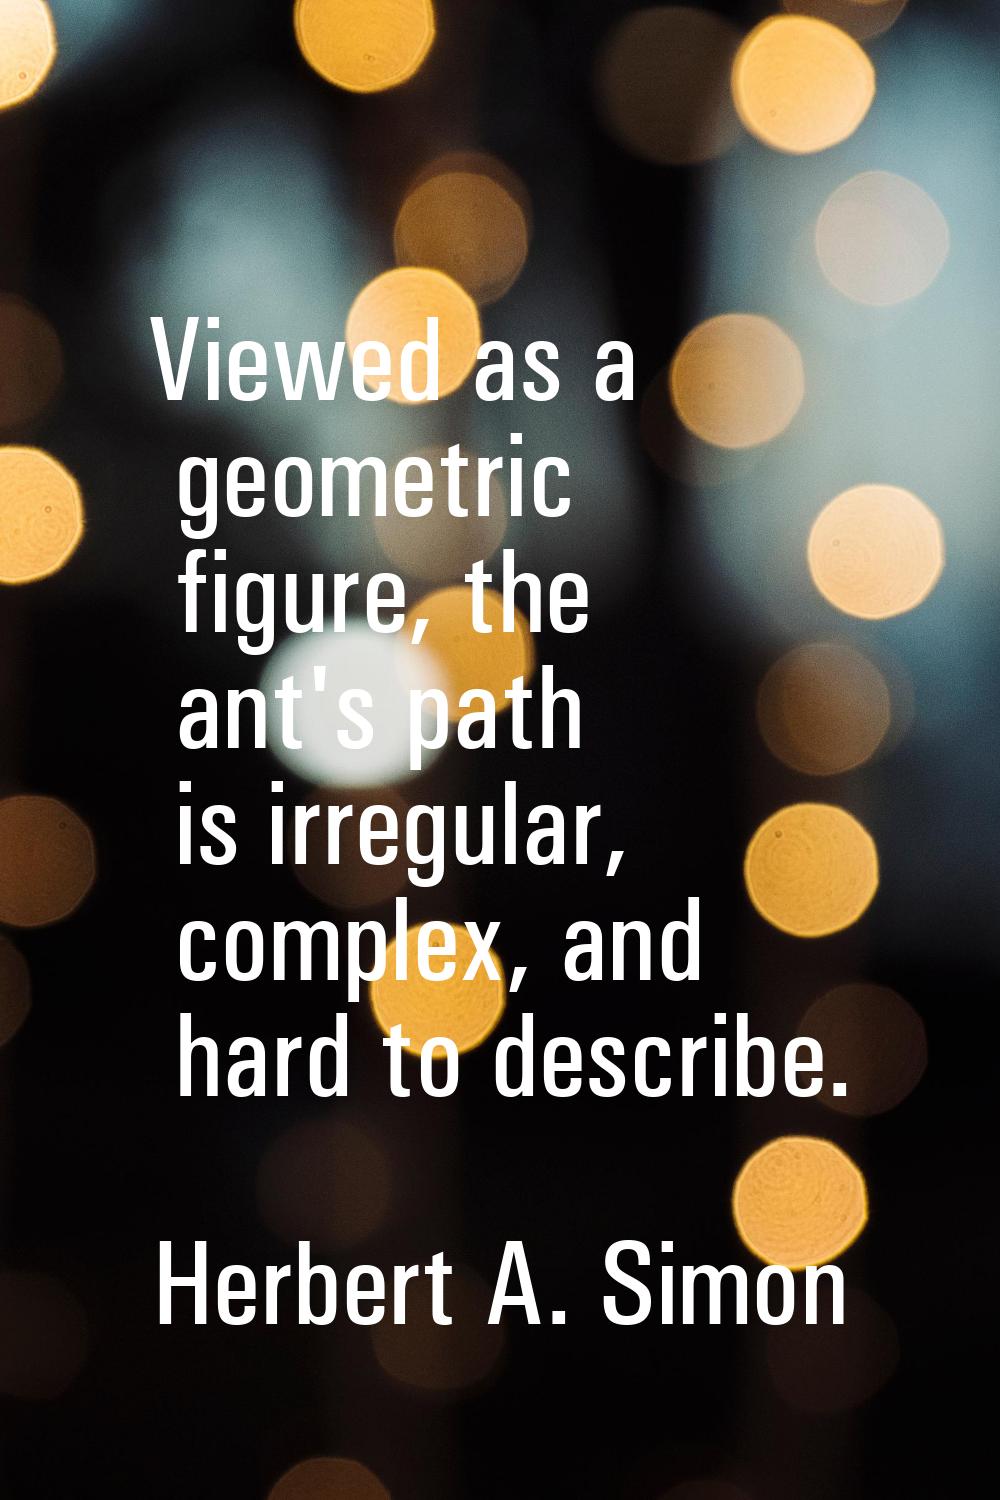 Viewed as a geometric figure, the ant's path is irregular, complex, and hard to describe.